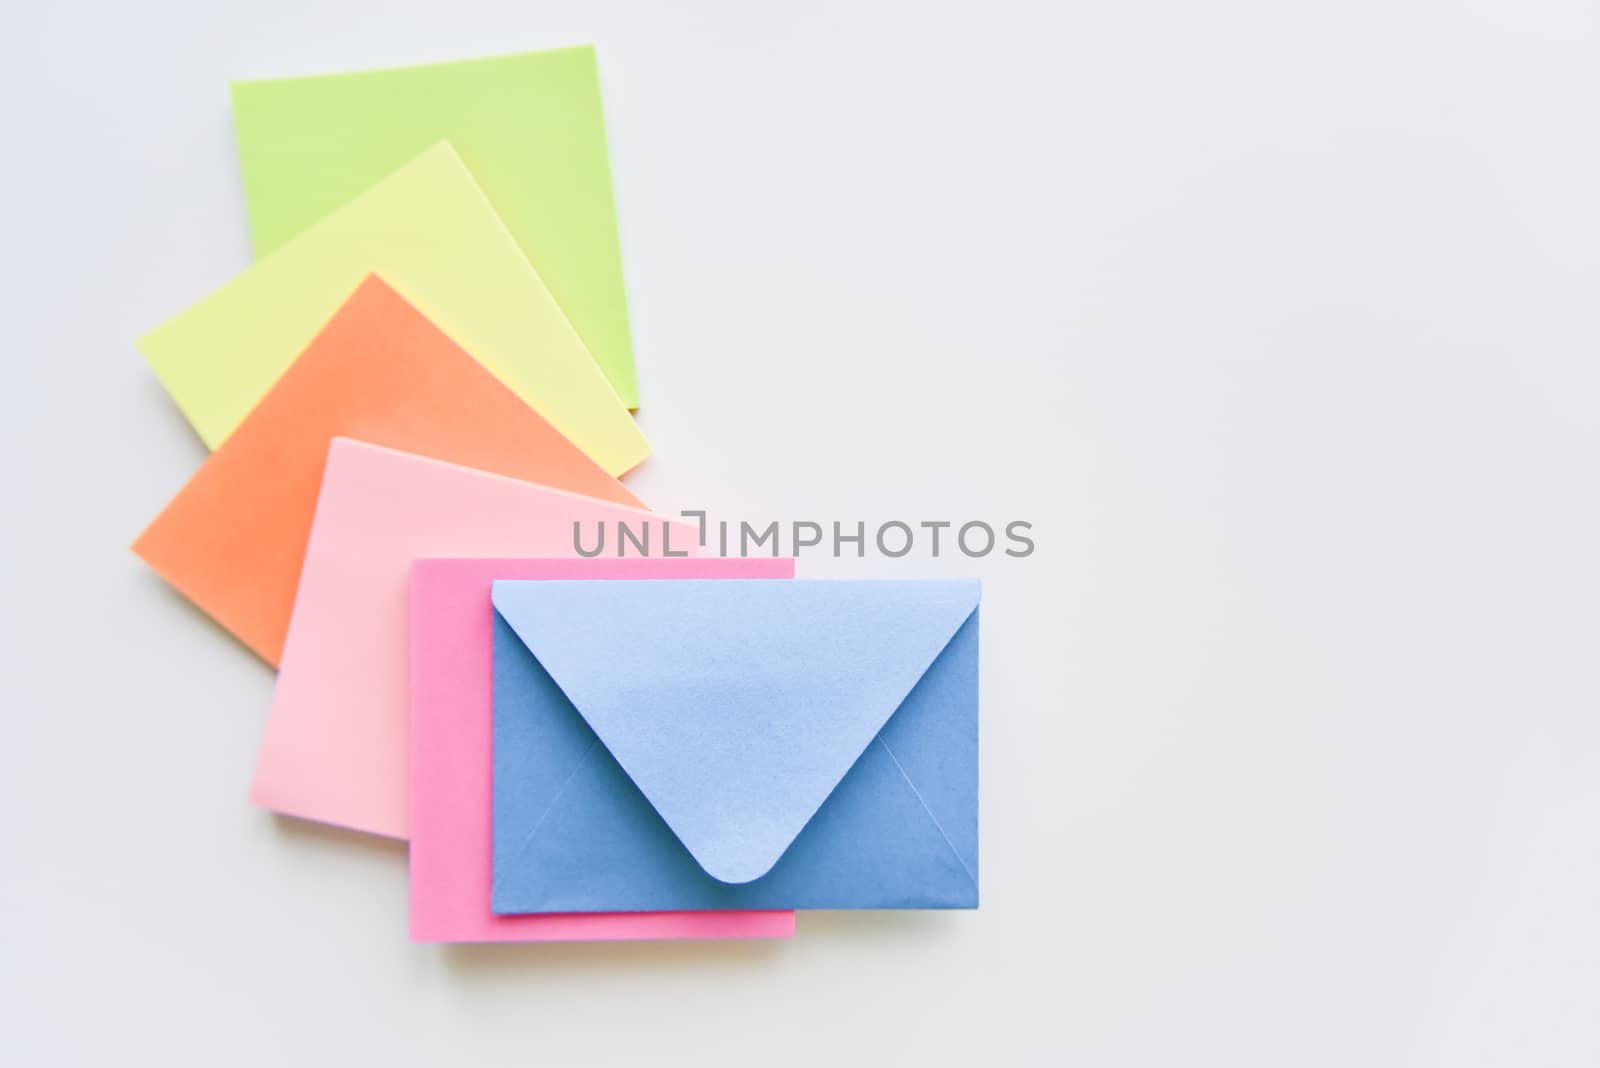 selective focus, blue envelope in the center with bright colored rectangles spreading under it